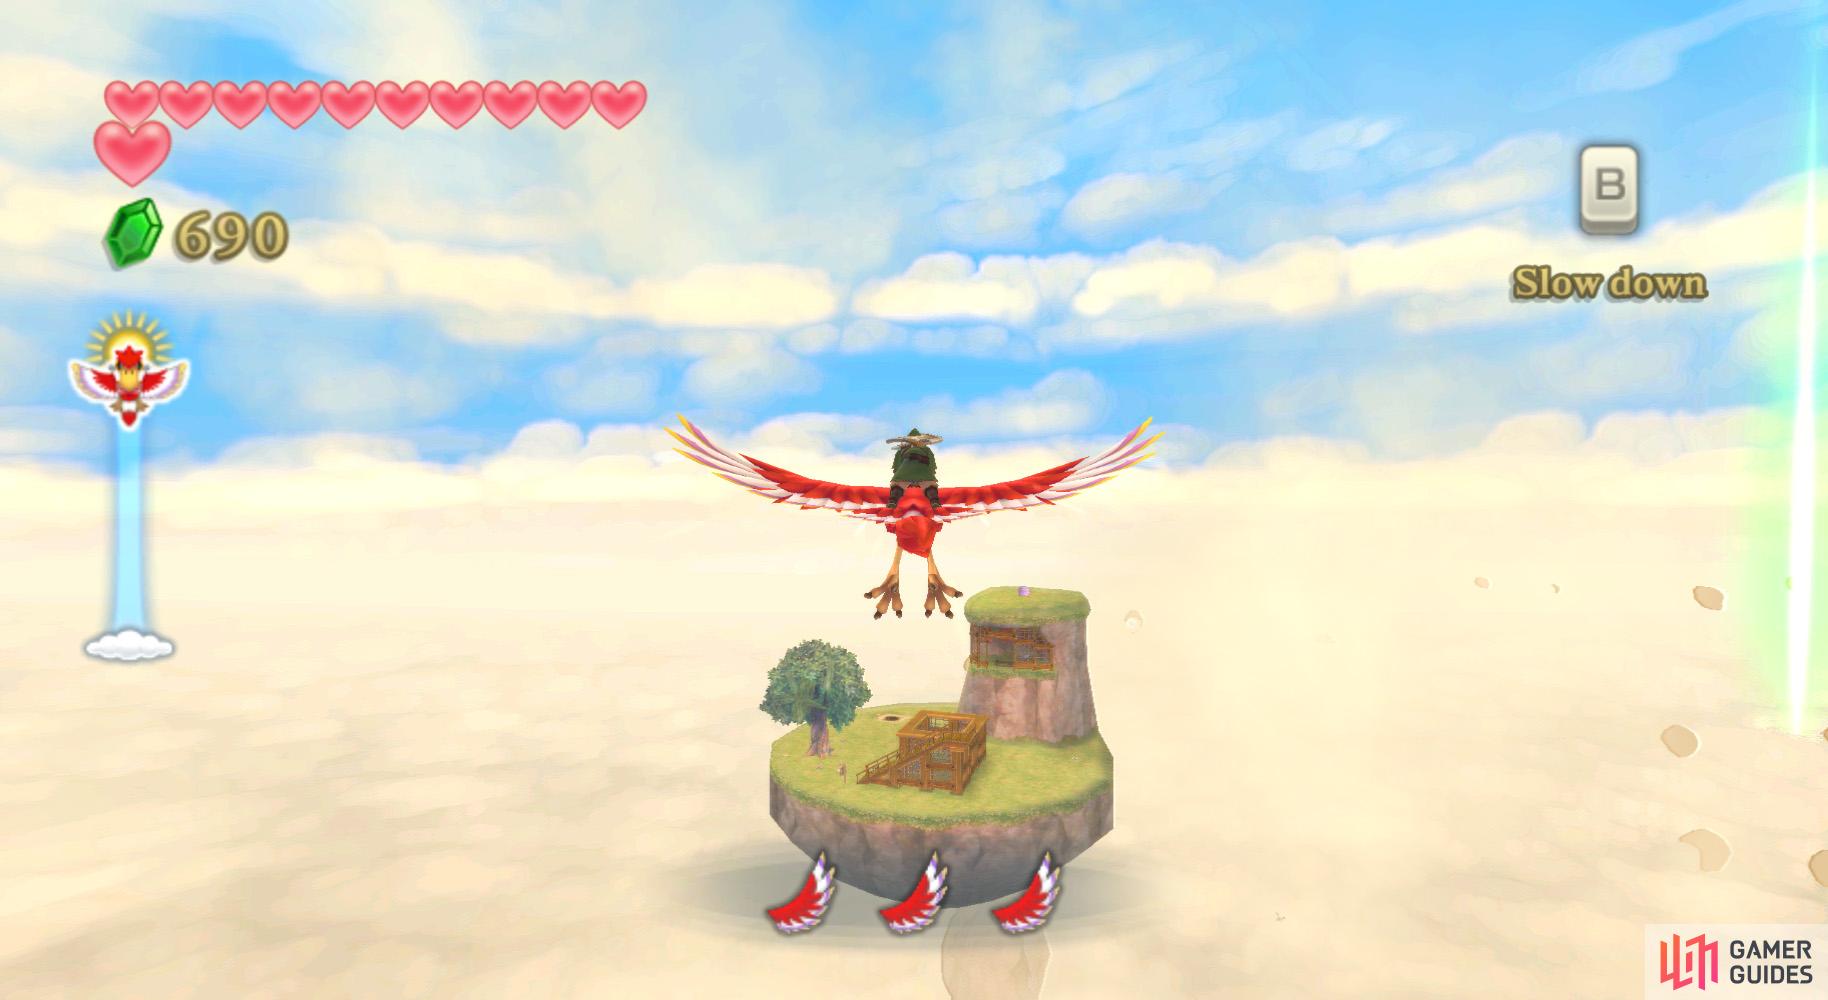 After activating the Temple of Time Goddess Cube, sky-dive to the tallest part of Beedle's Island.